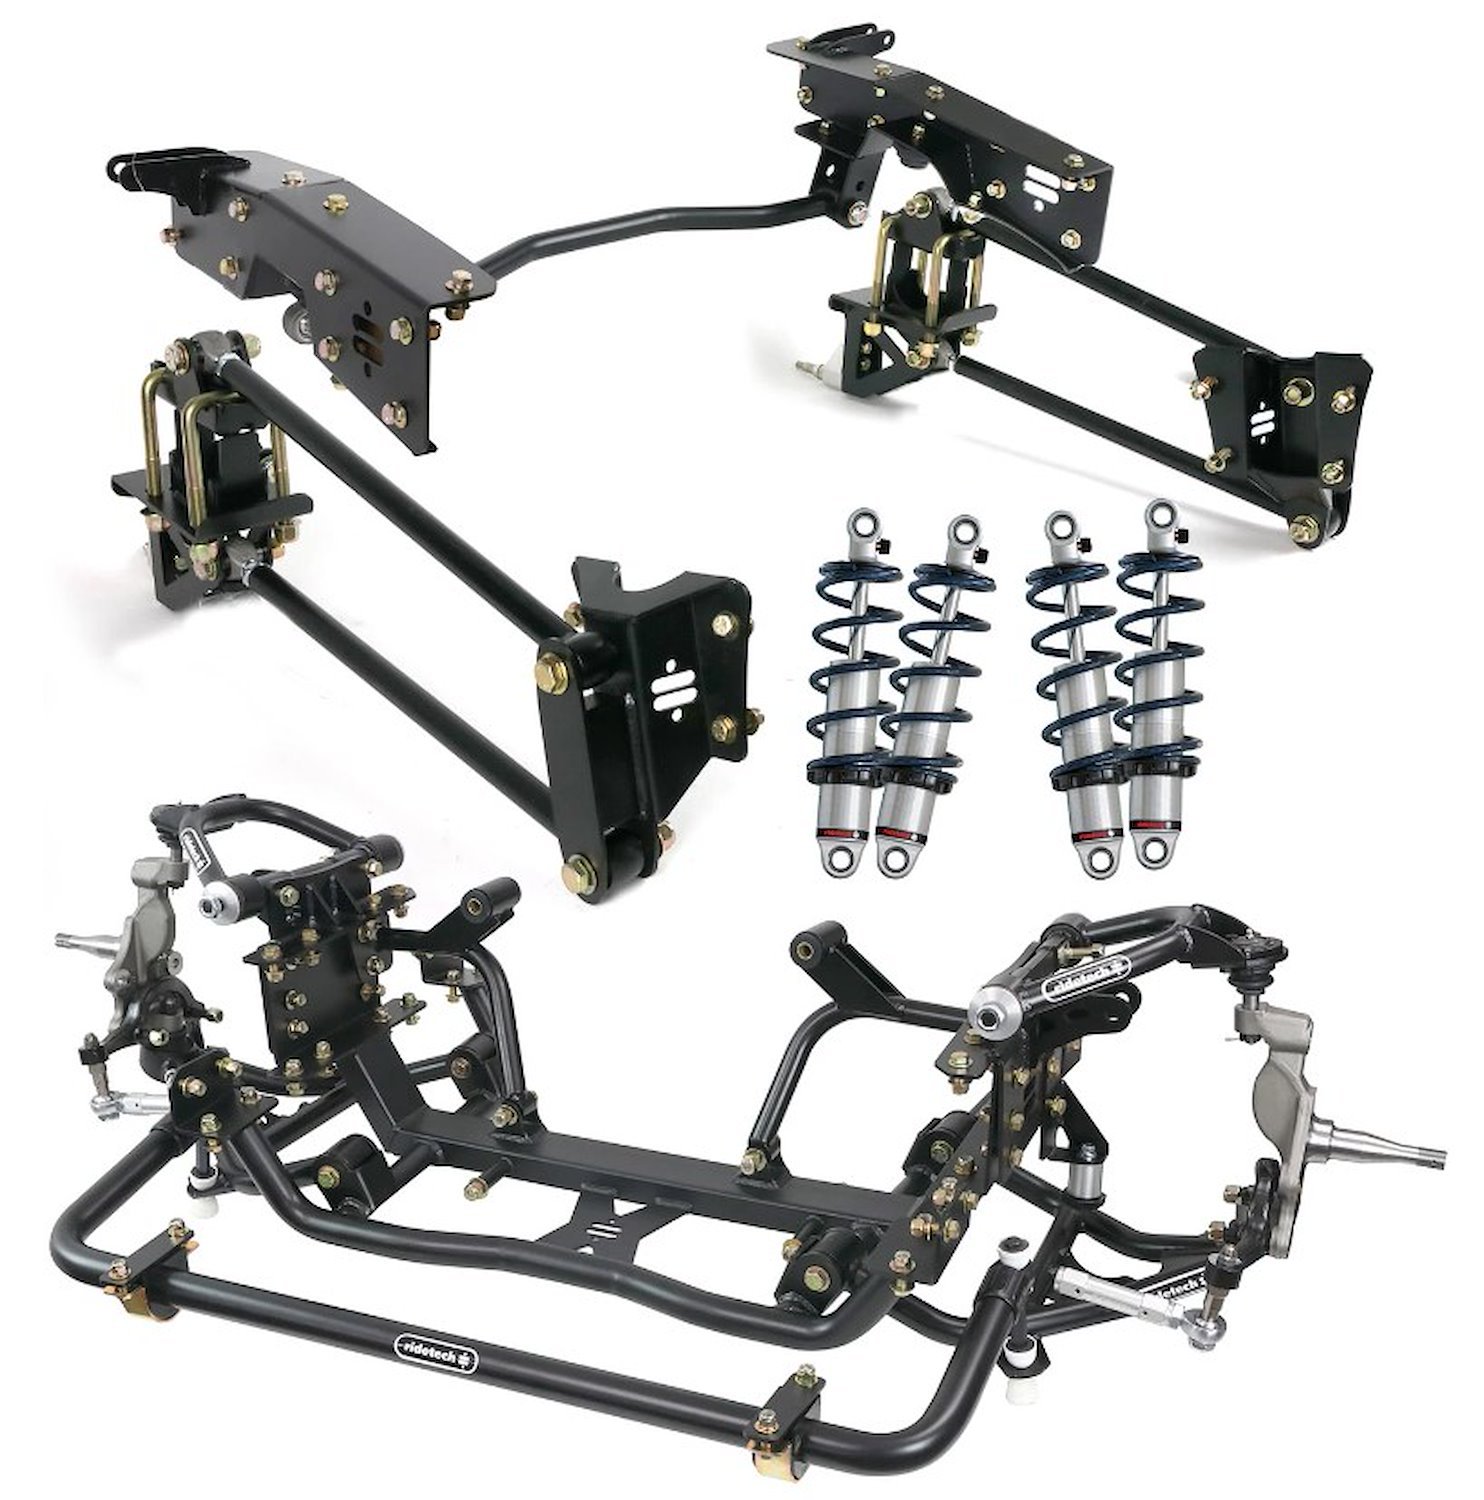 Complete Suspension System w/Coil-Overs for 1973-1979 Ford F-100, F-150 Trucks 2WD